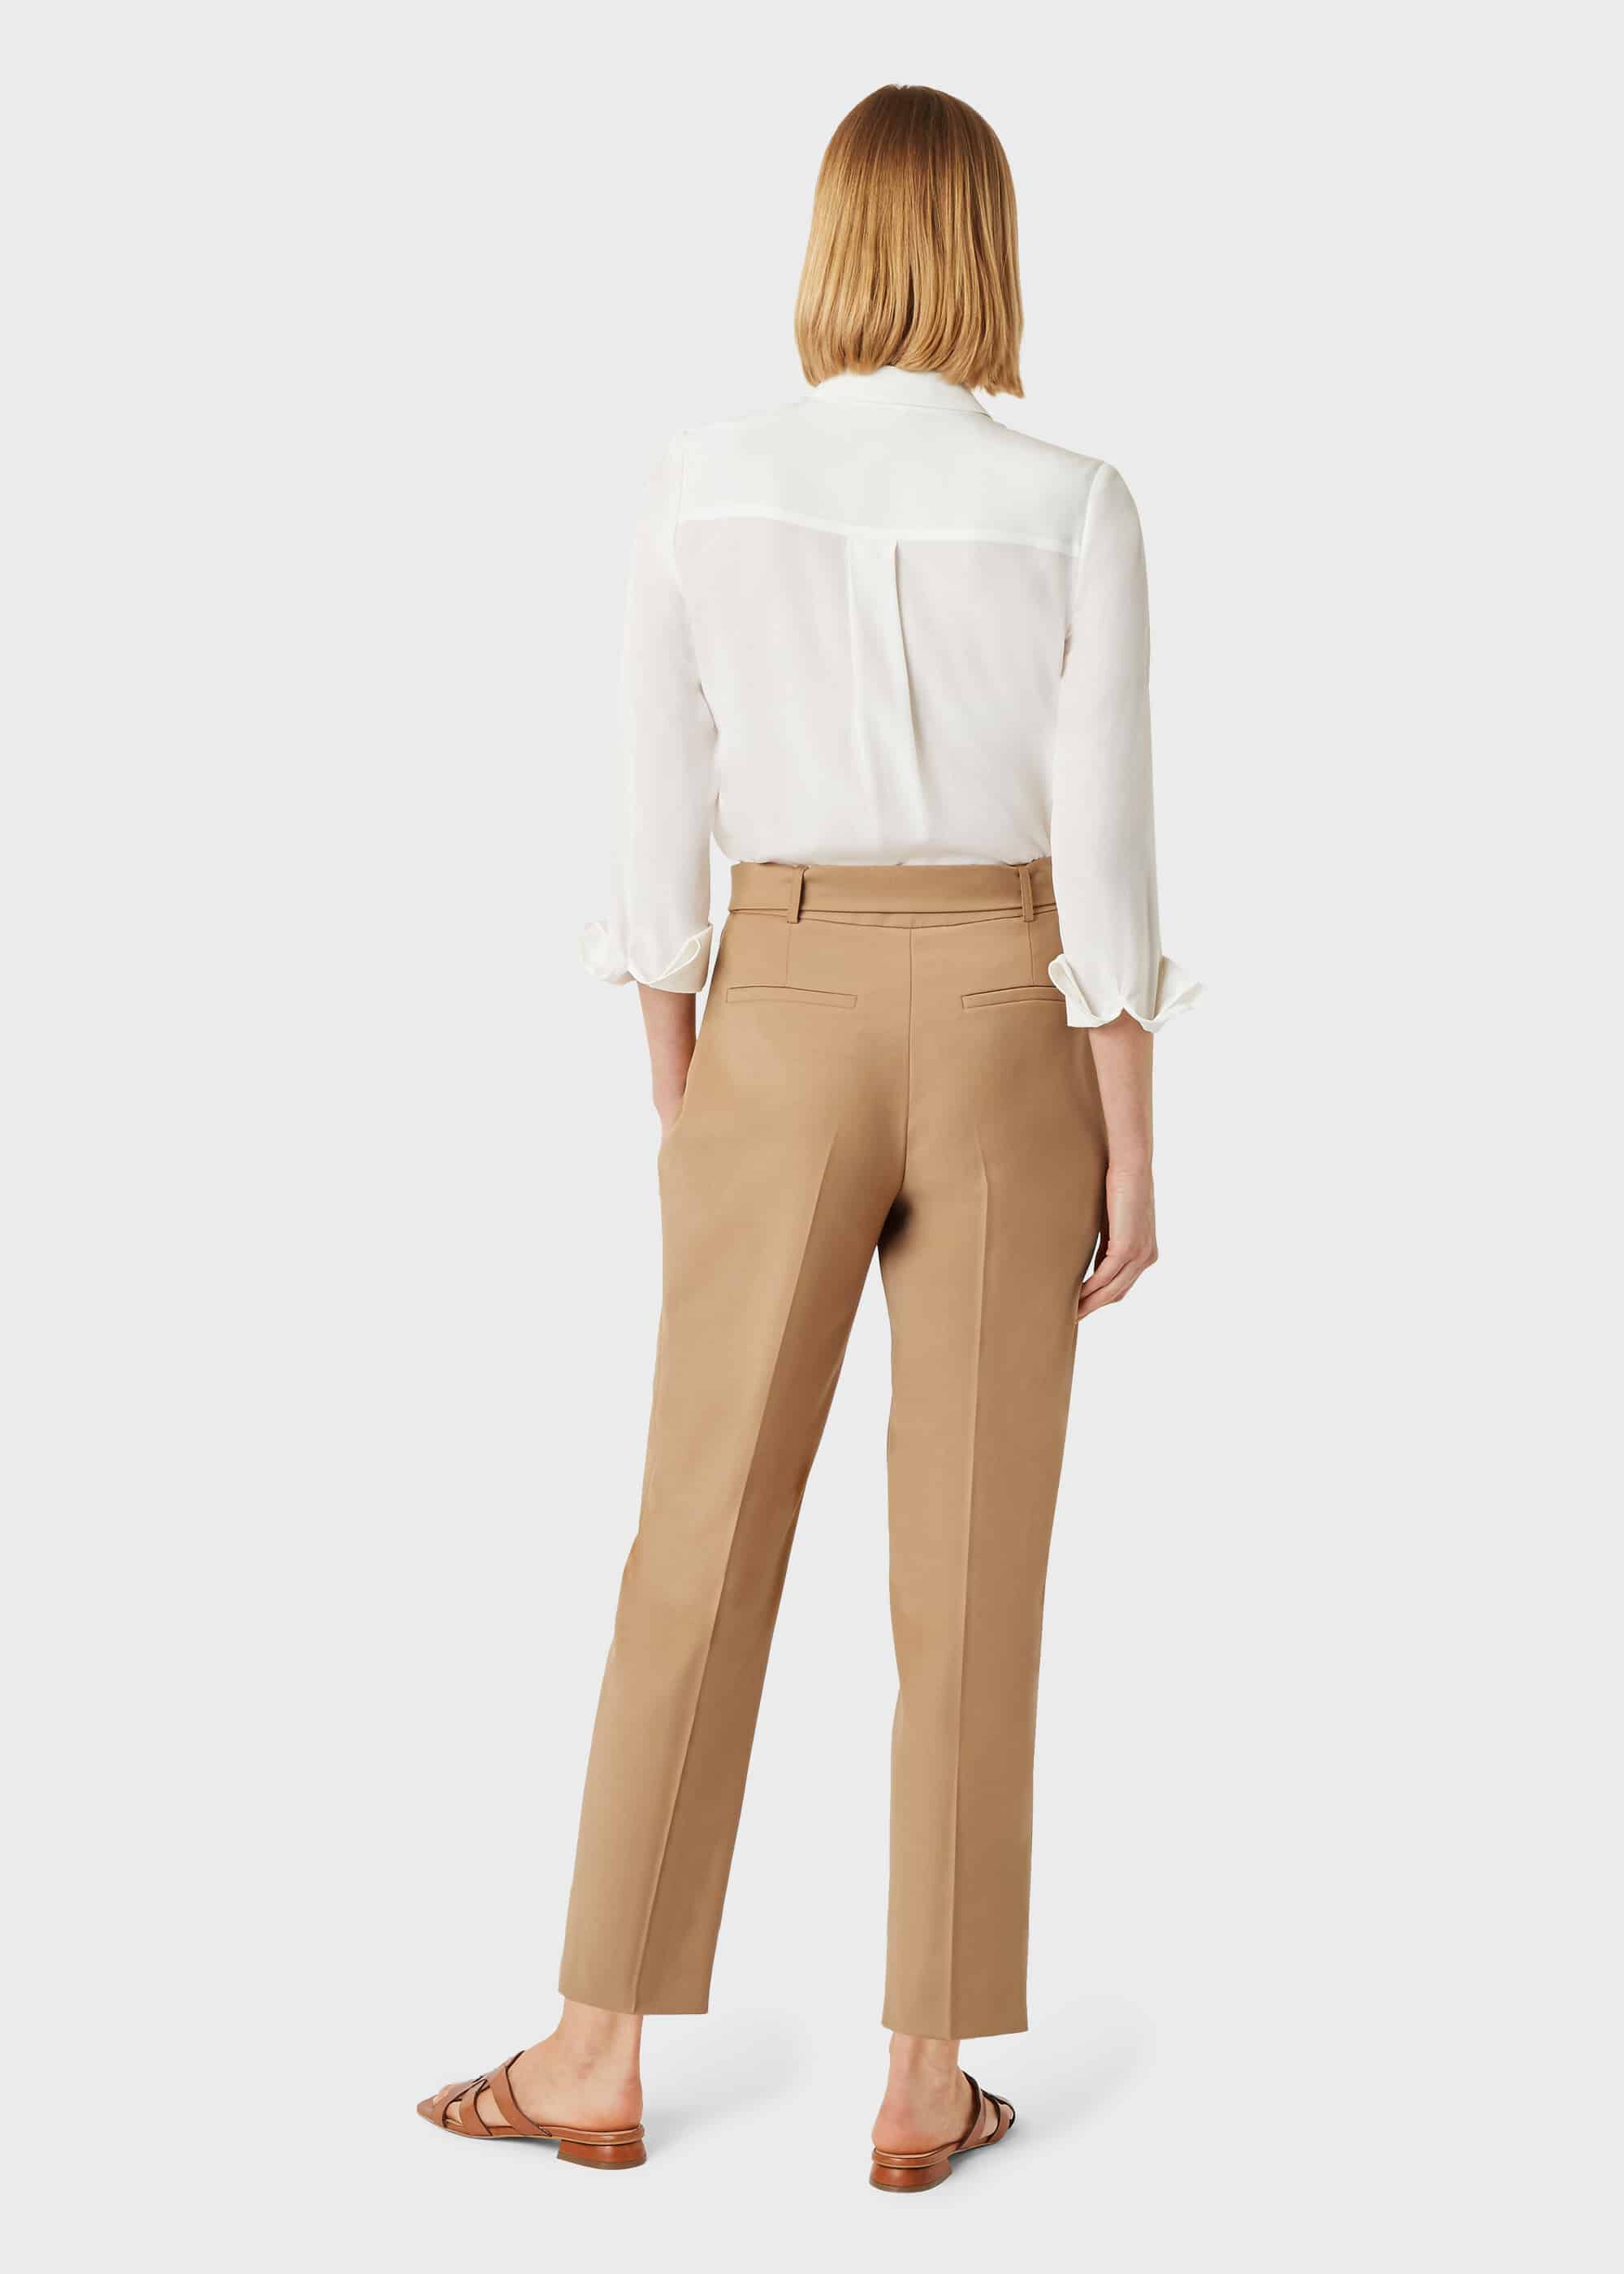 Madame Trousers and Pants  Buy Madame Women Camel Trousers Online  Nykaa  Fashion